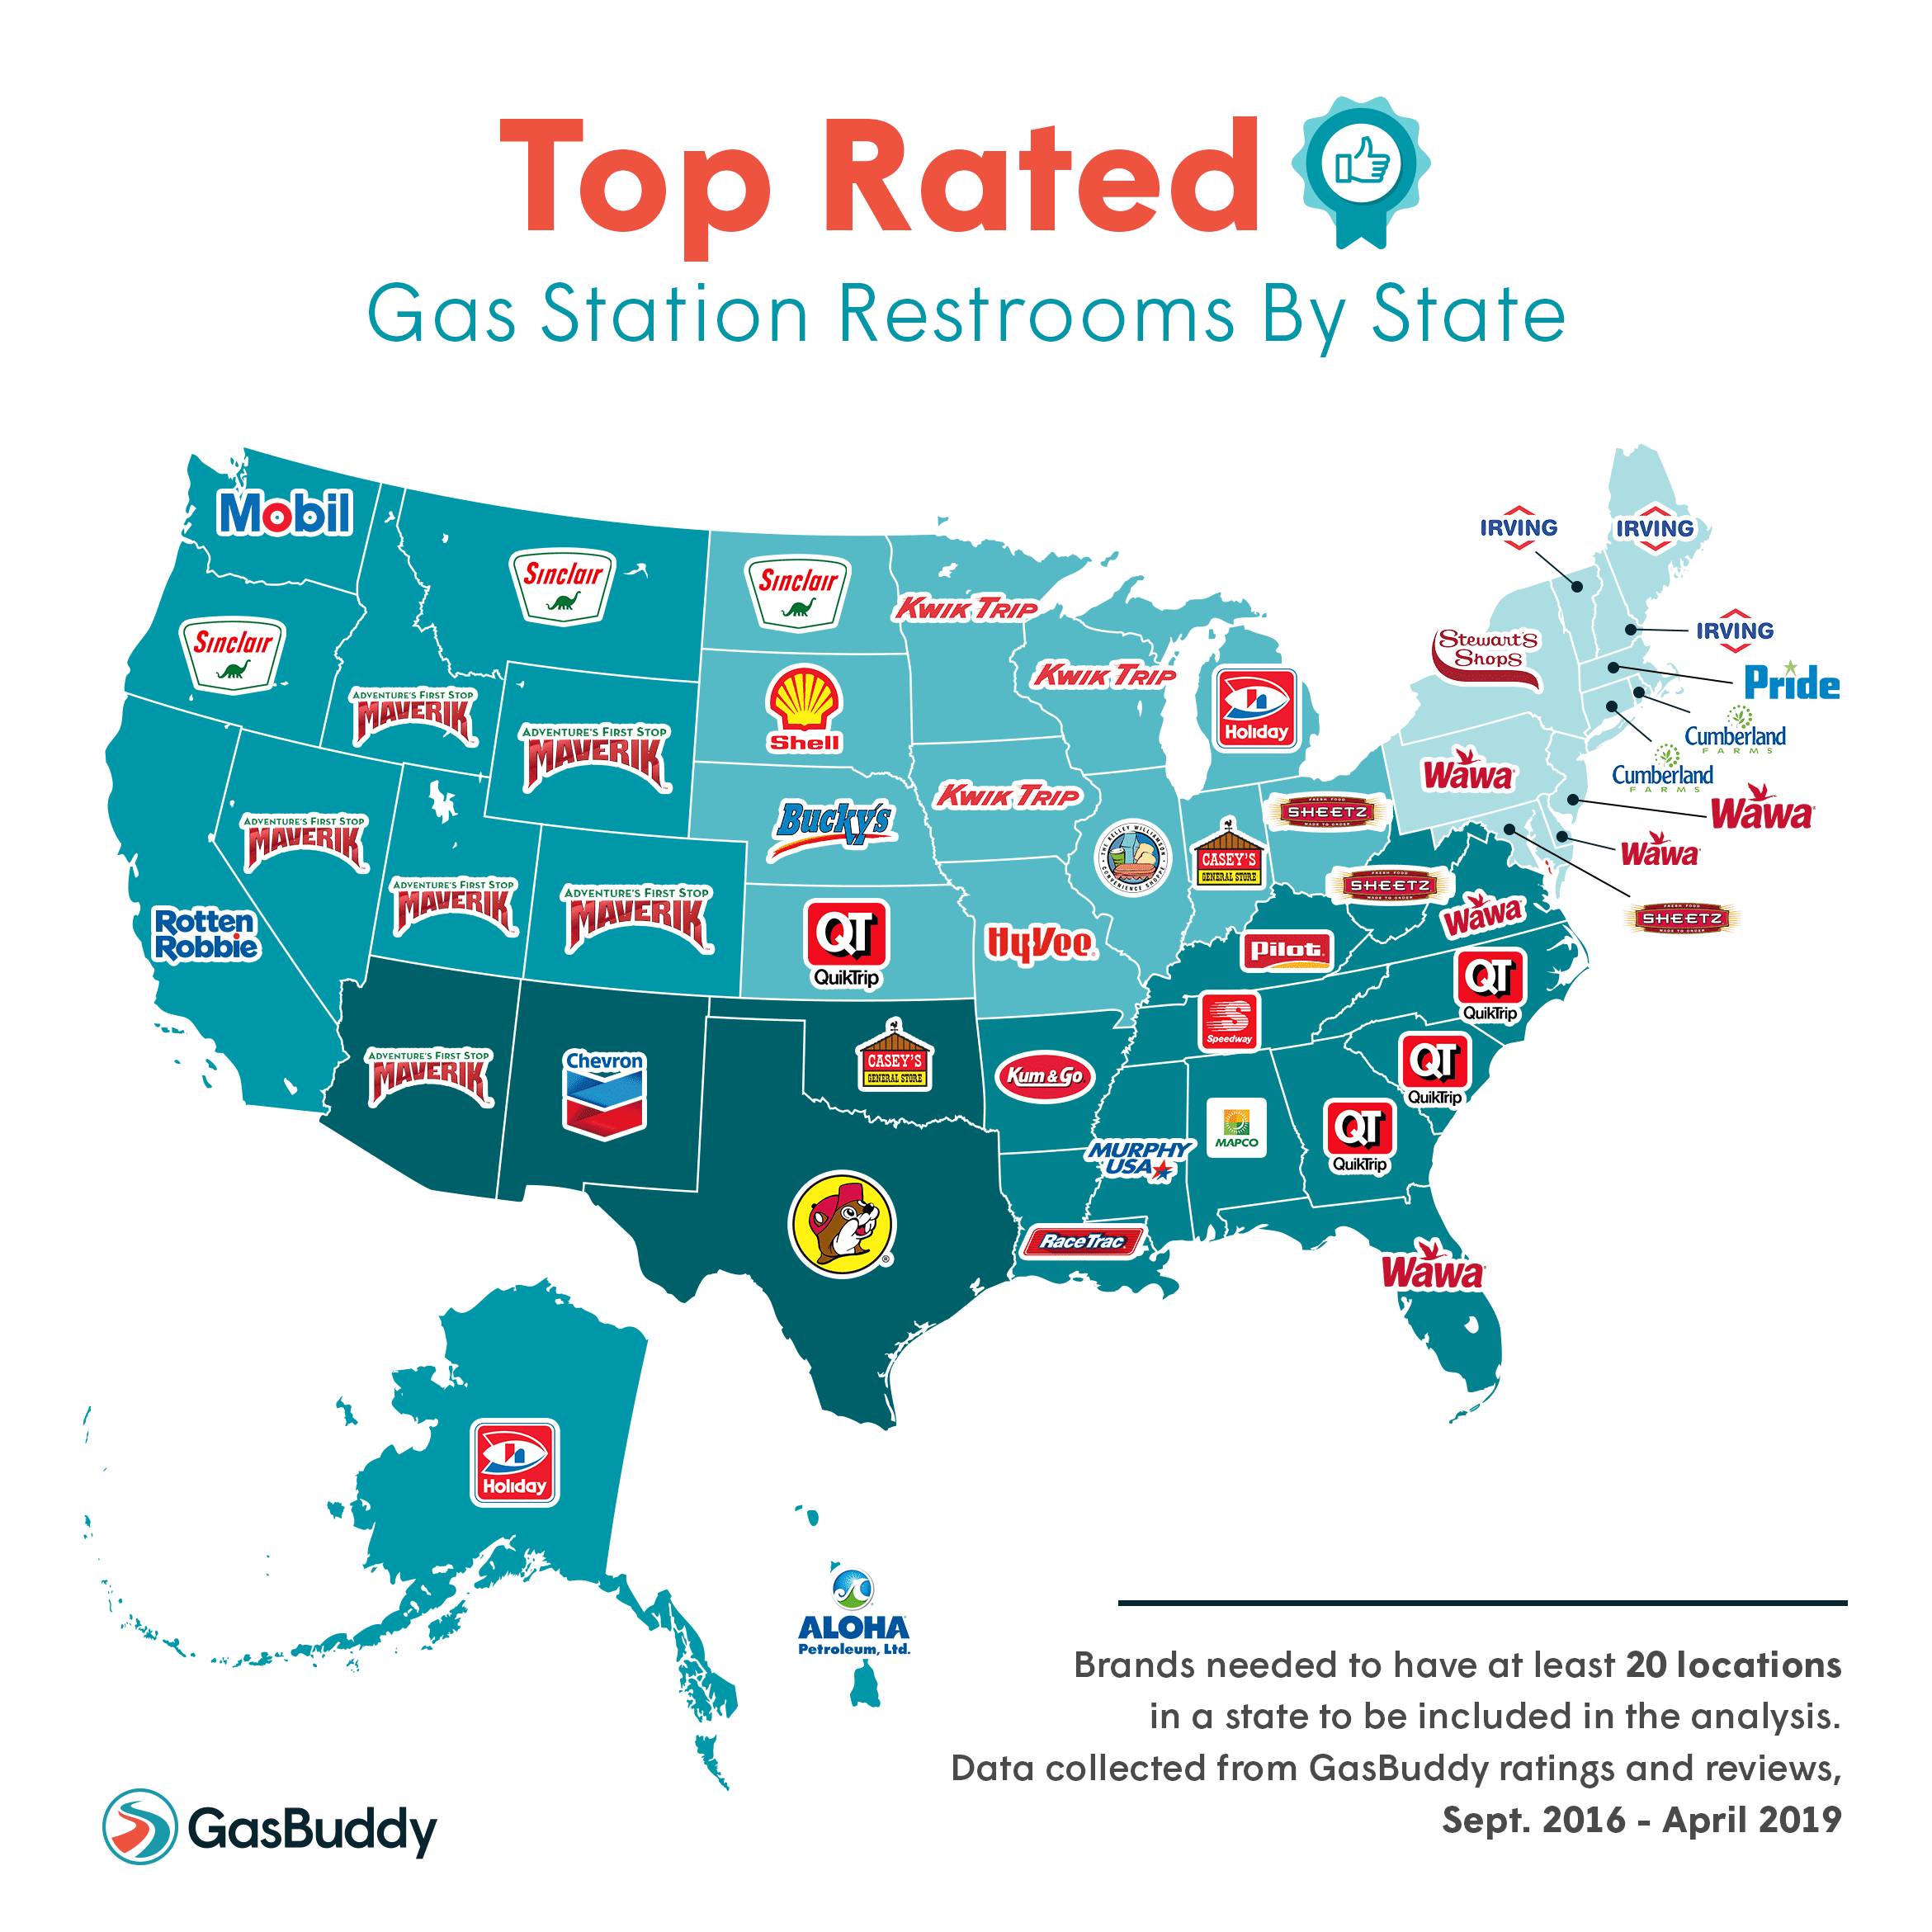 GasBuddy Reveals Top-Rated Gas Station Restrooms in Every State